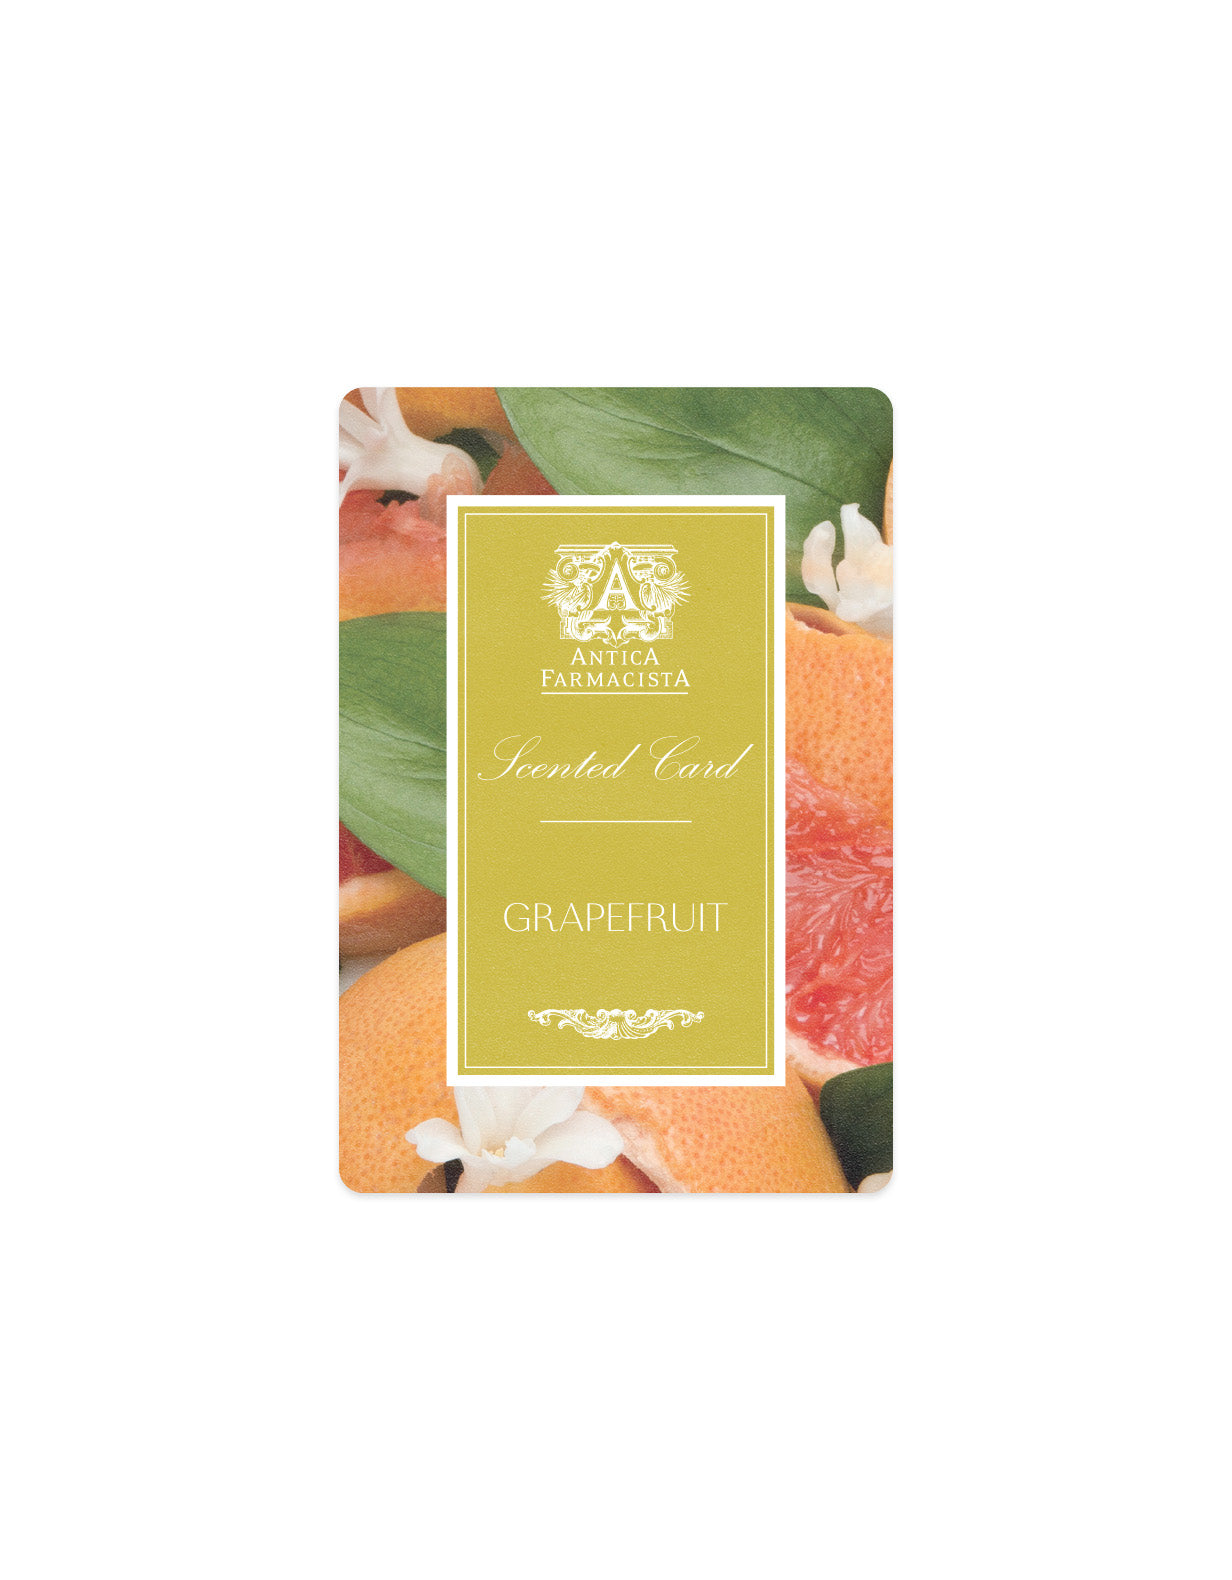 GWP - Scented Card - Grapefruit